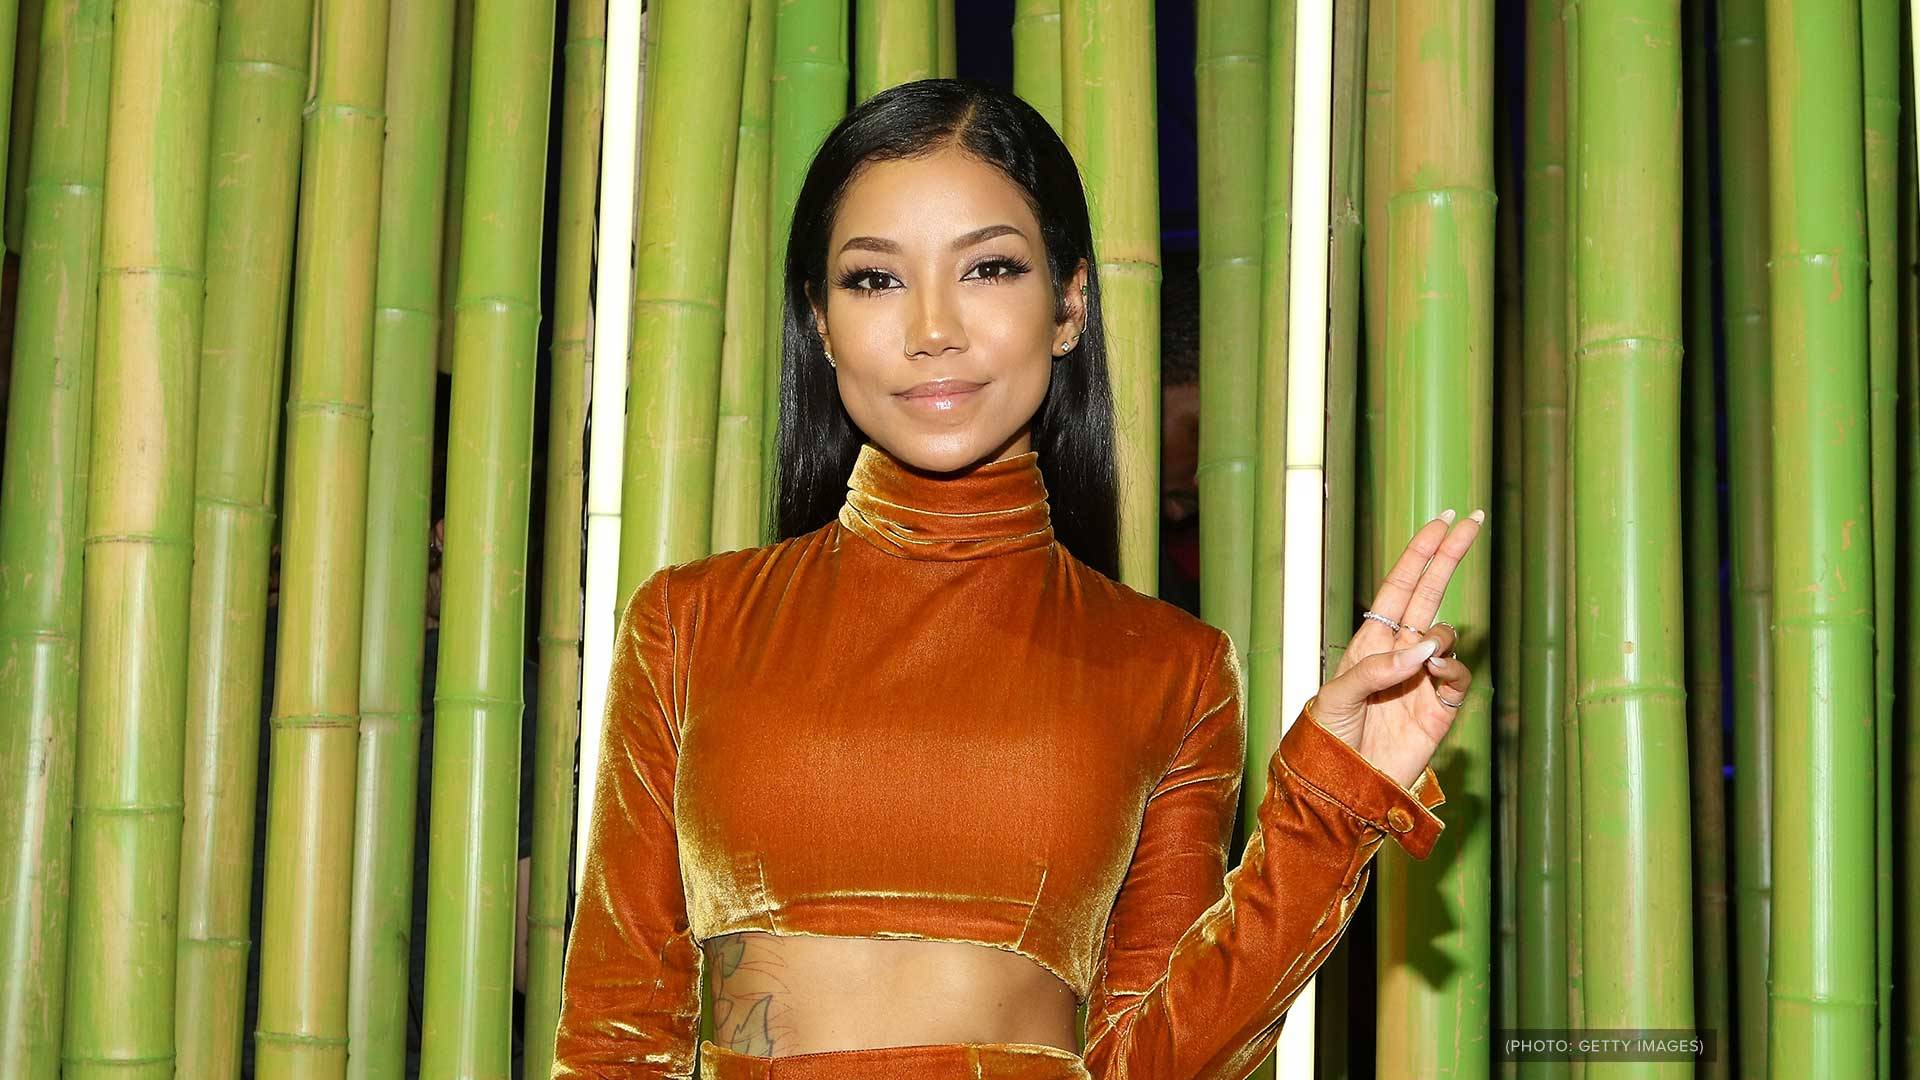 BET Awards 2022 5 of Jhené Aiko’s Most Hypnotizing Songs of All Time